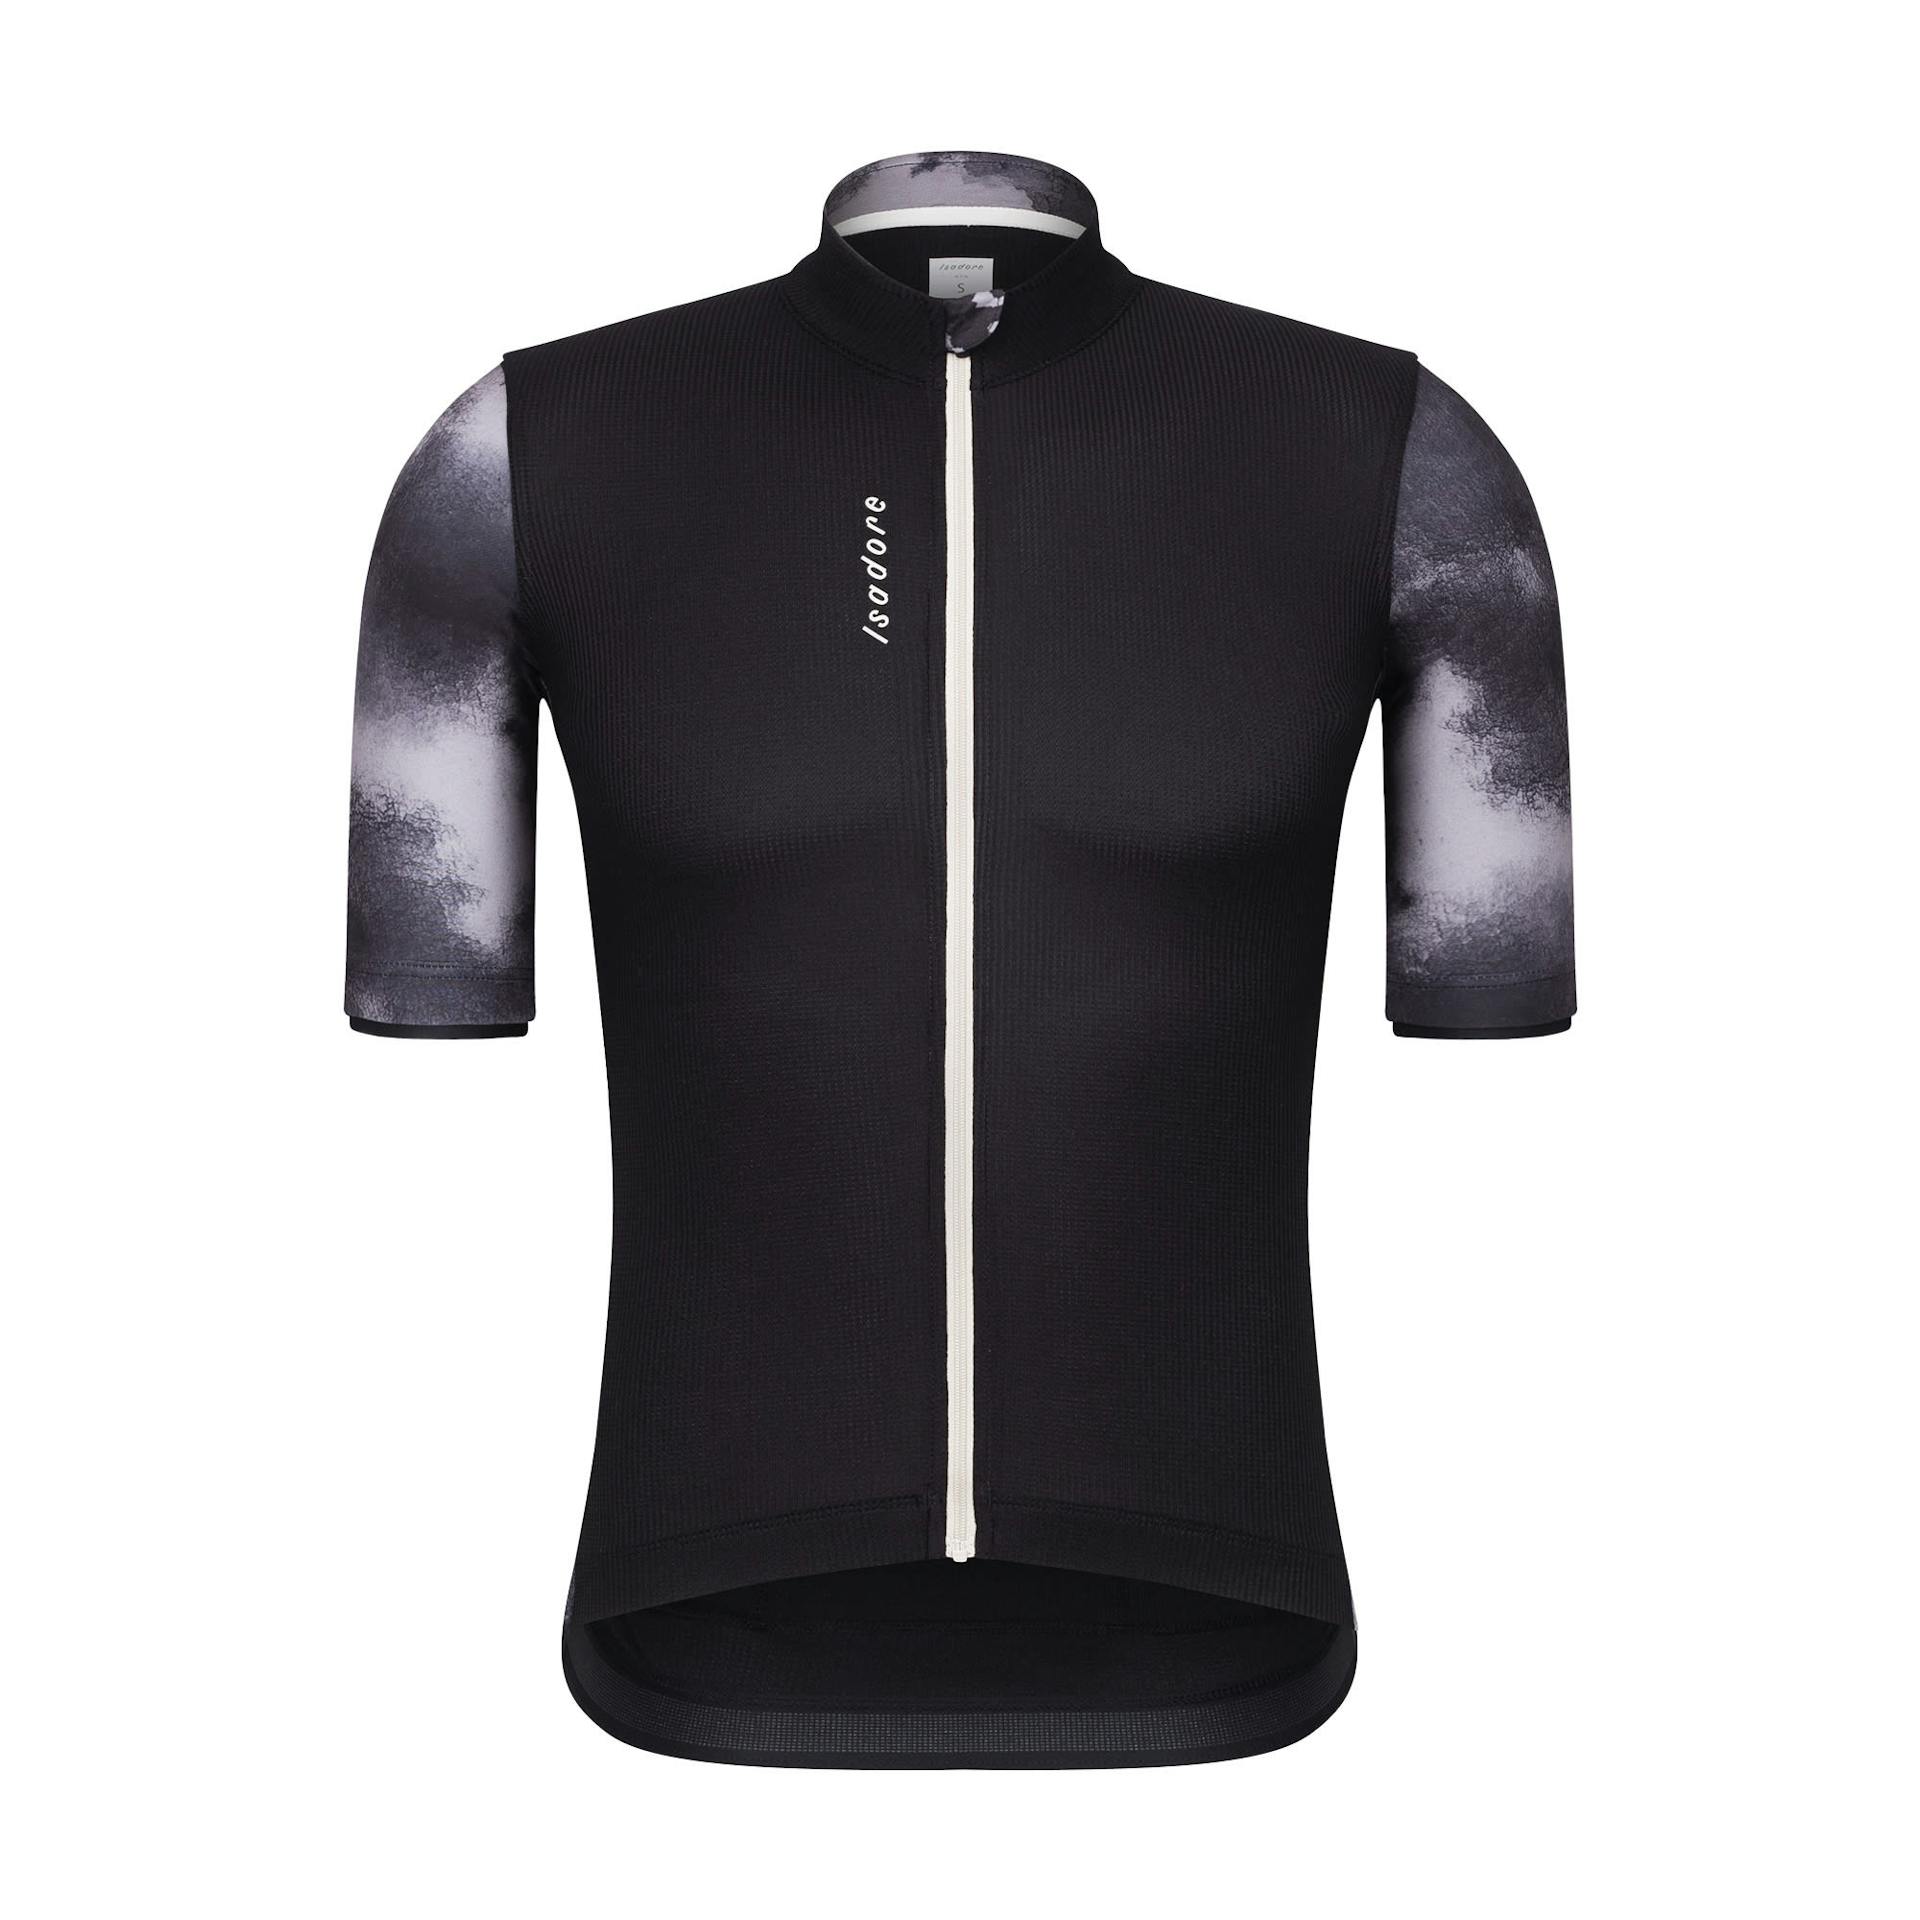 Signature Climber's Jersey - Anthracite / Oyster Gray
                        